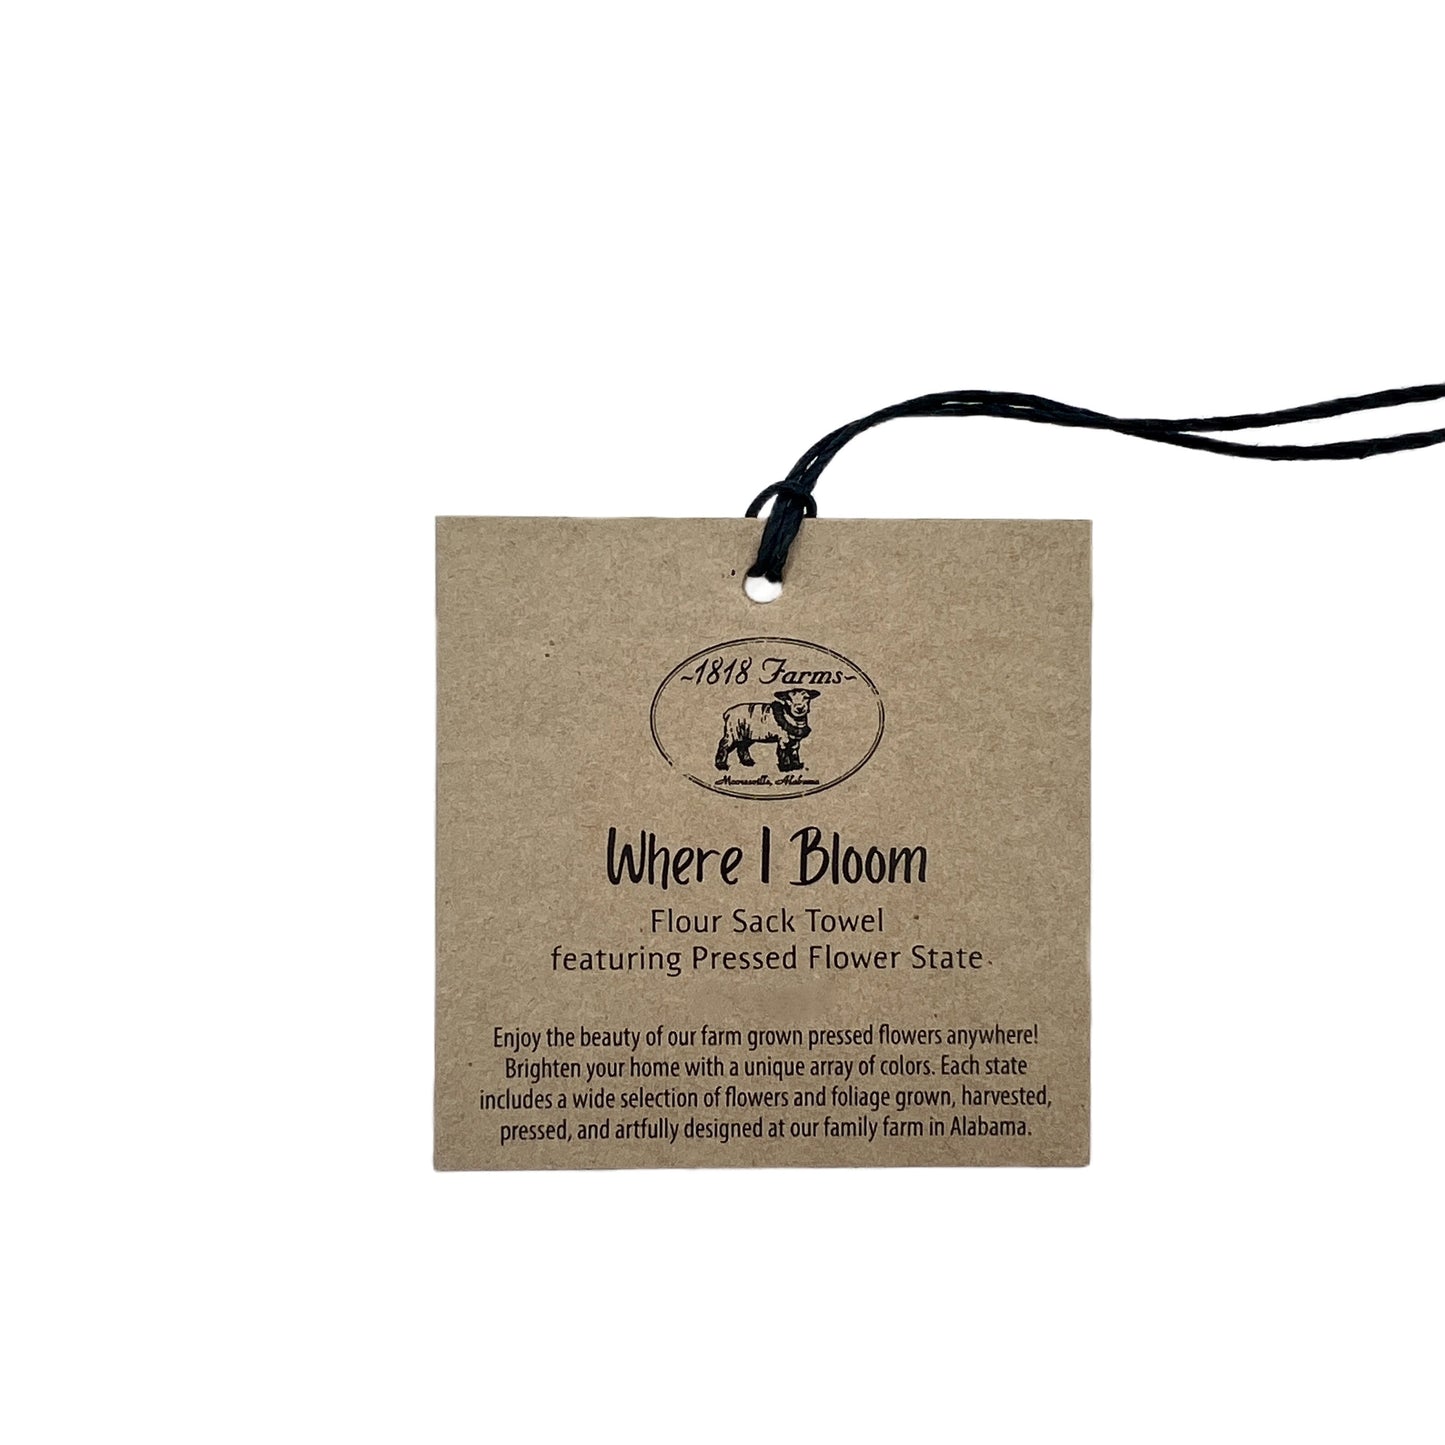 State Themed Flour Sack Towel  - "Where I Bloom" Collection Towel 1818 Farms   